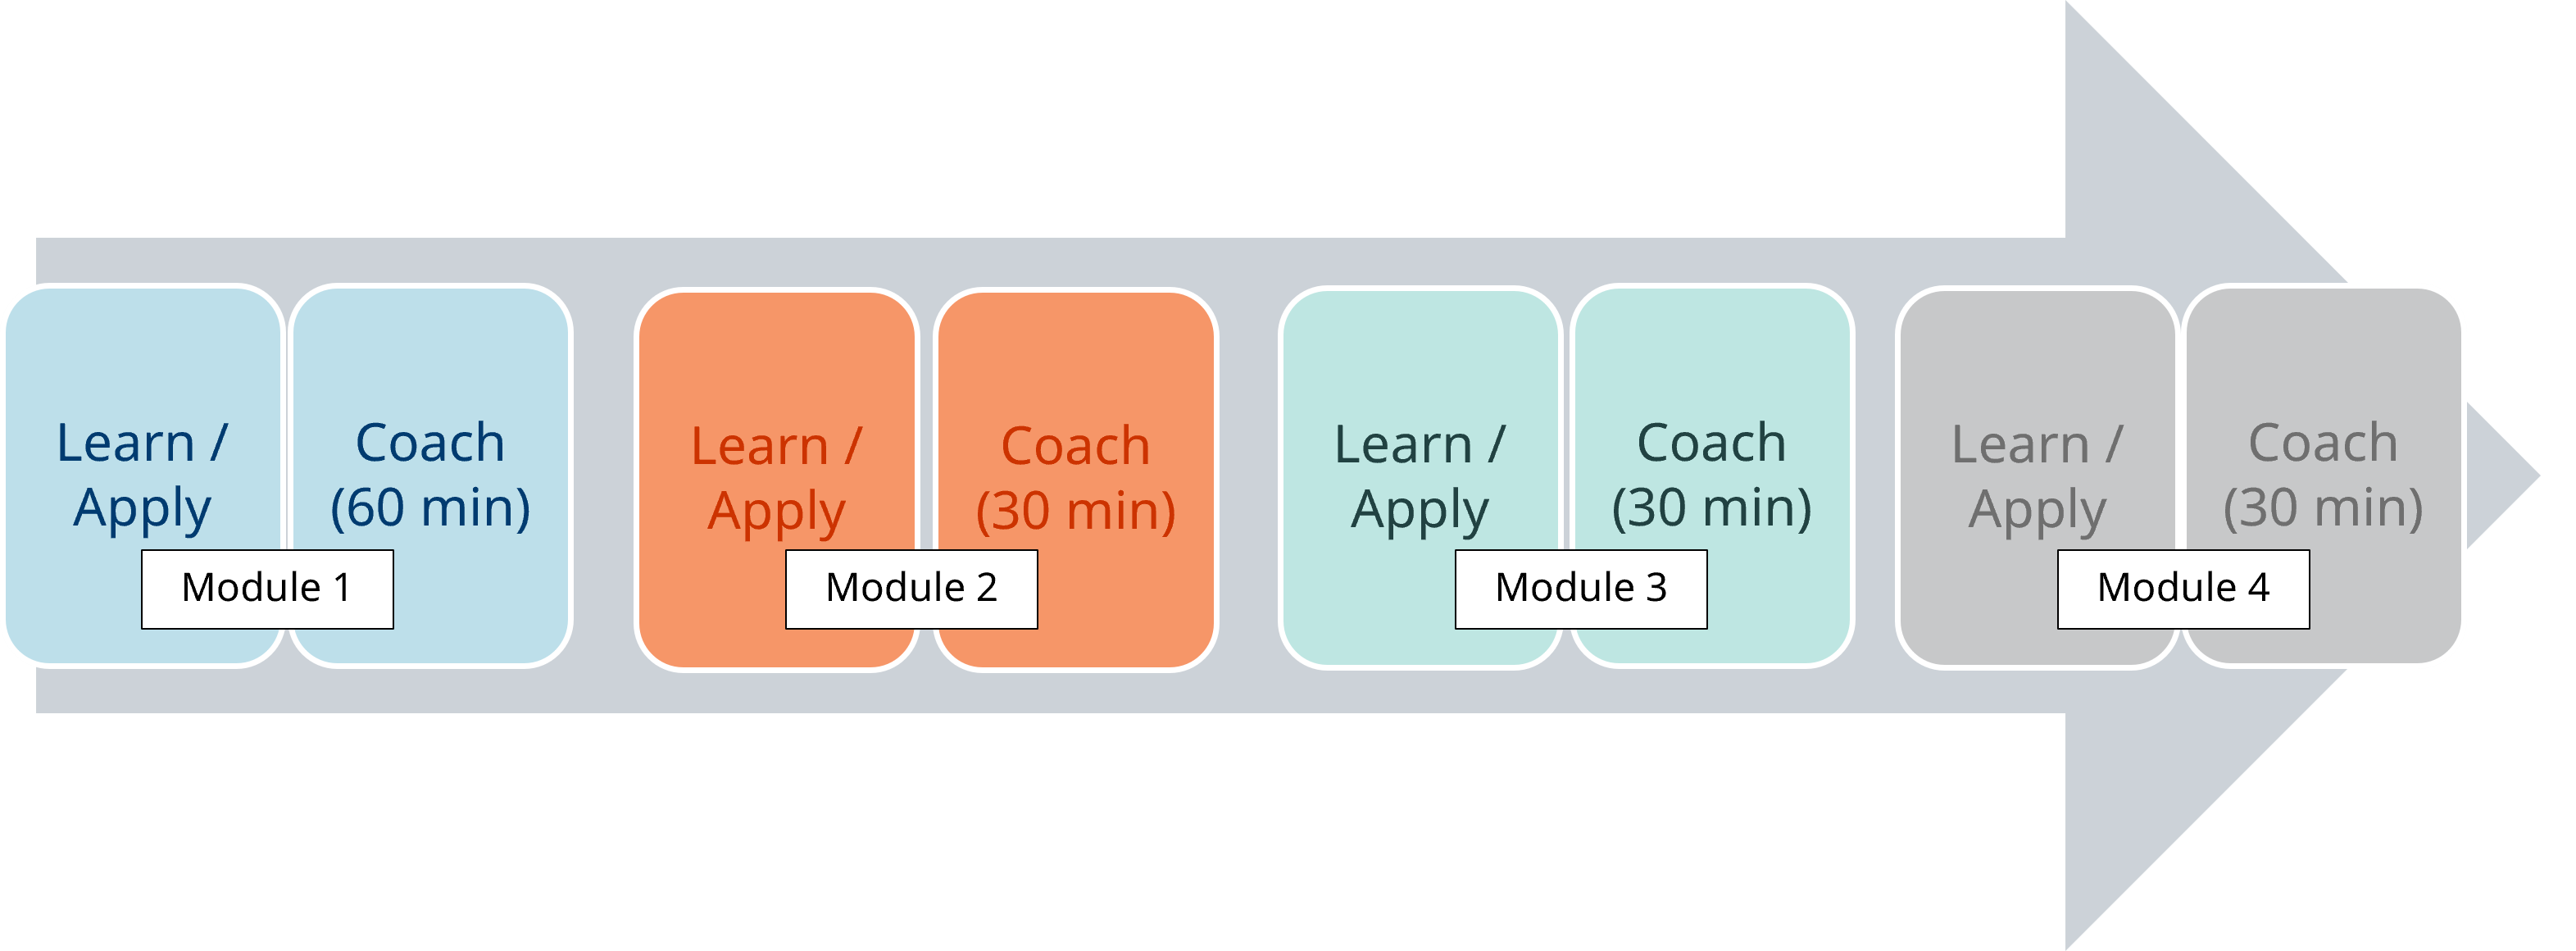 Scalable Coaching Timeline